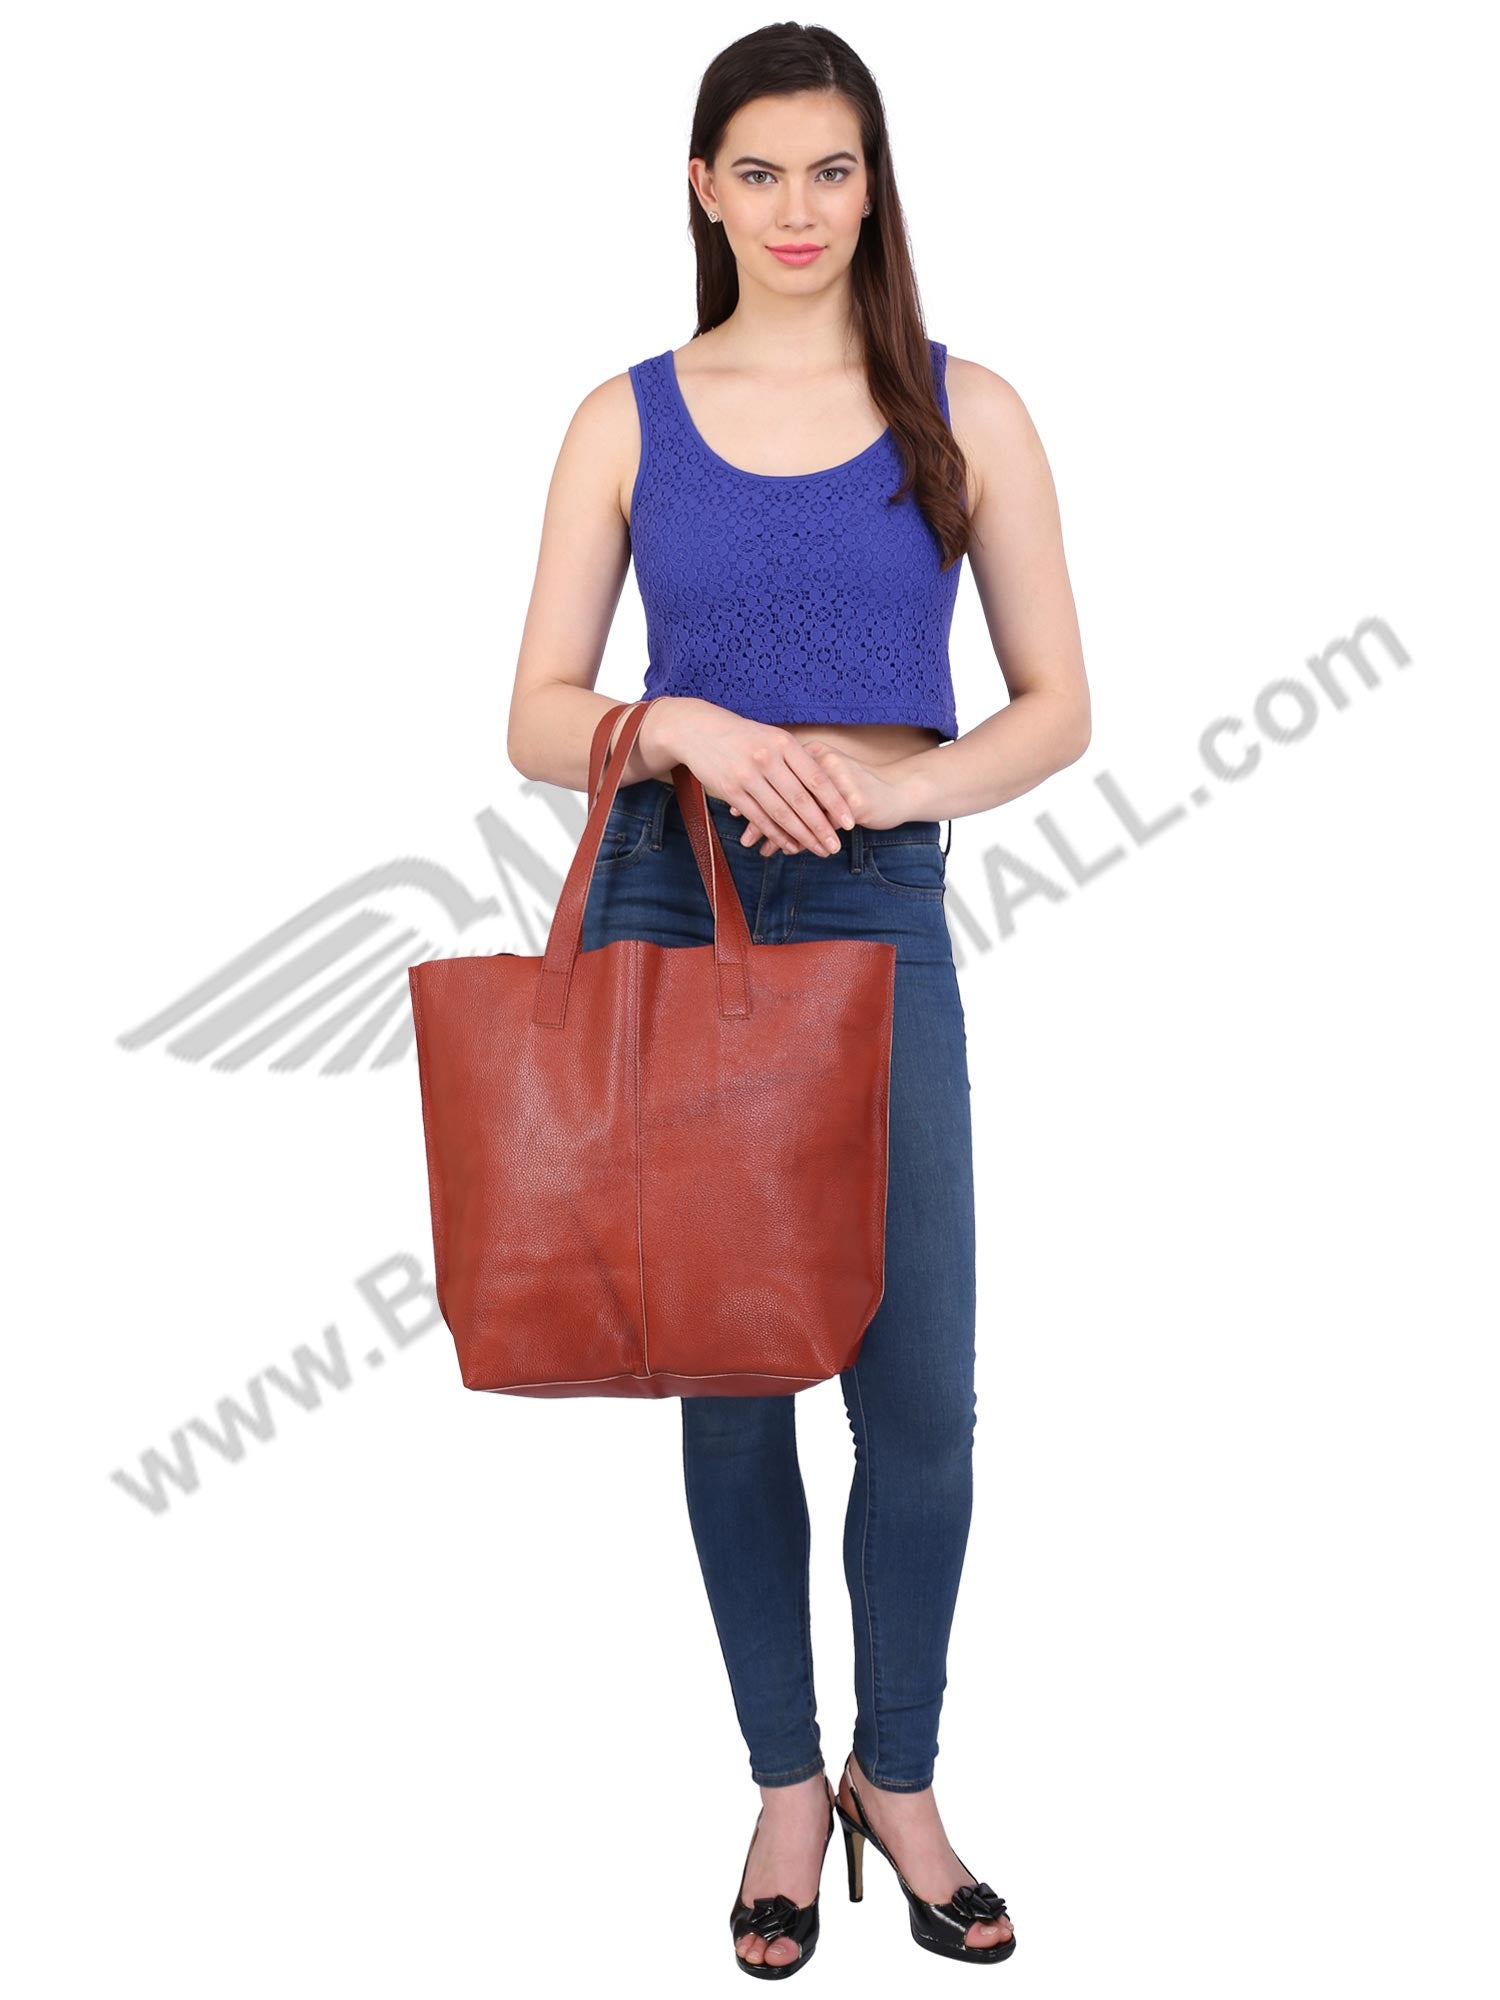 Front image of brown LUFT SHOPPING BAG. A model posing  with it.